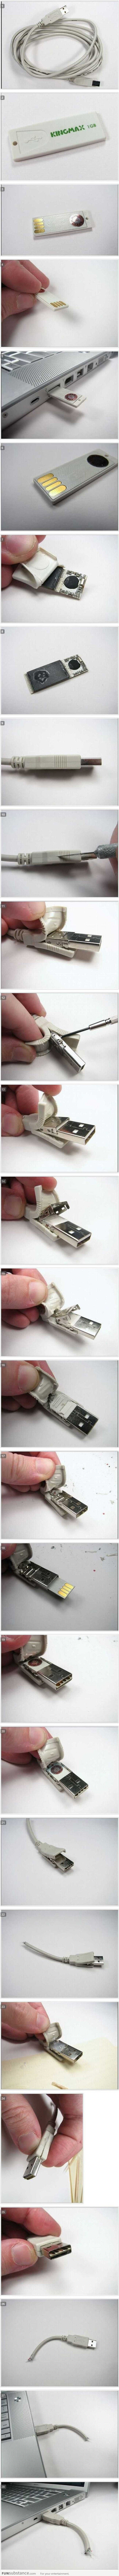 How To Make A Cool USB Flash Drive